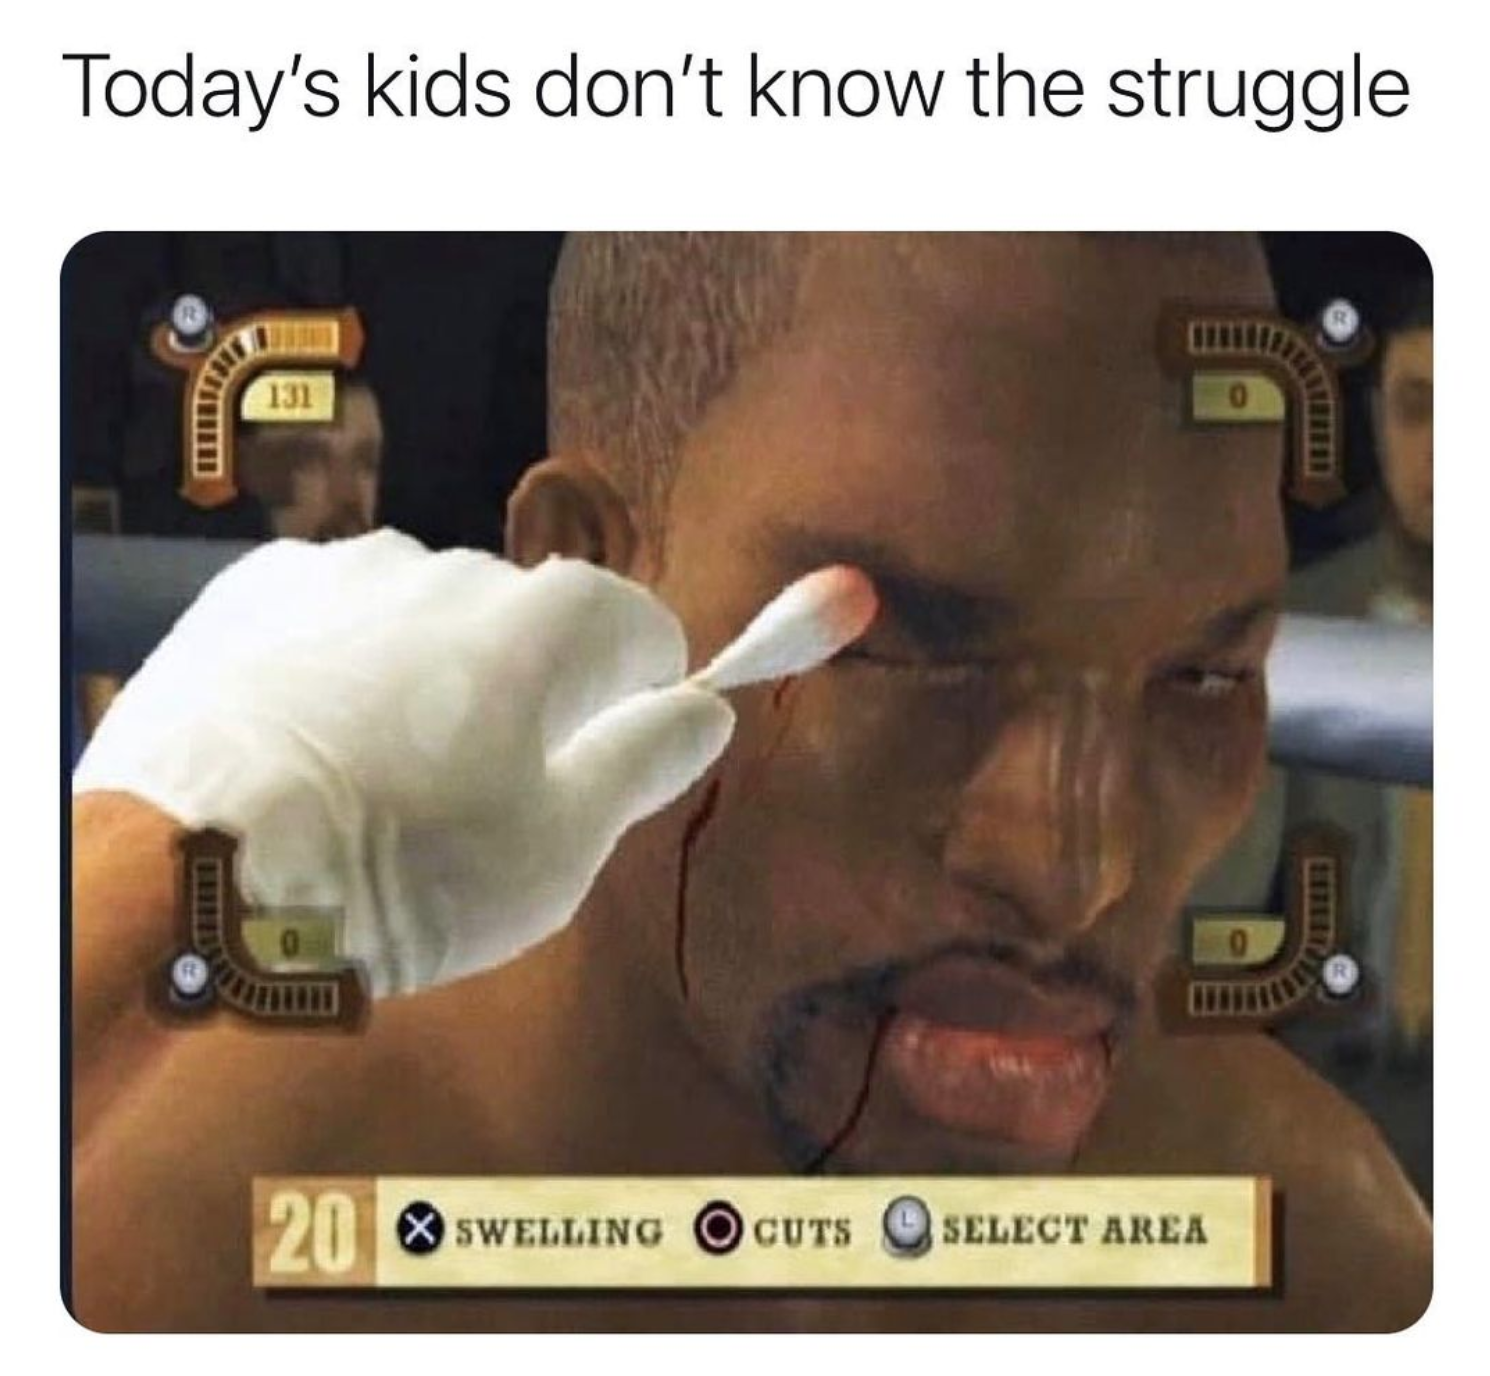 funny gaming memes - jaw - Today's kids don't know the struggle 131 20 Swelling O curs Select Area